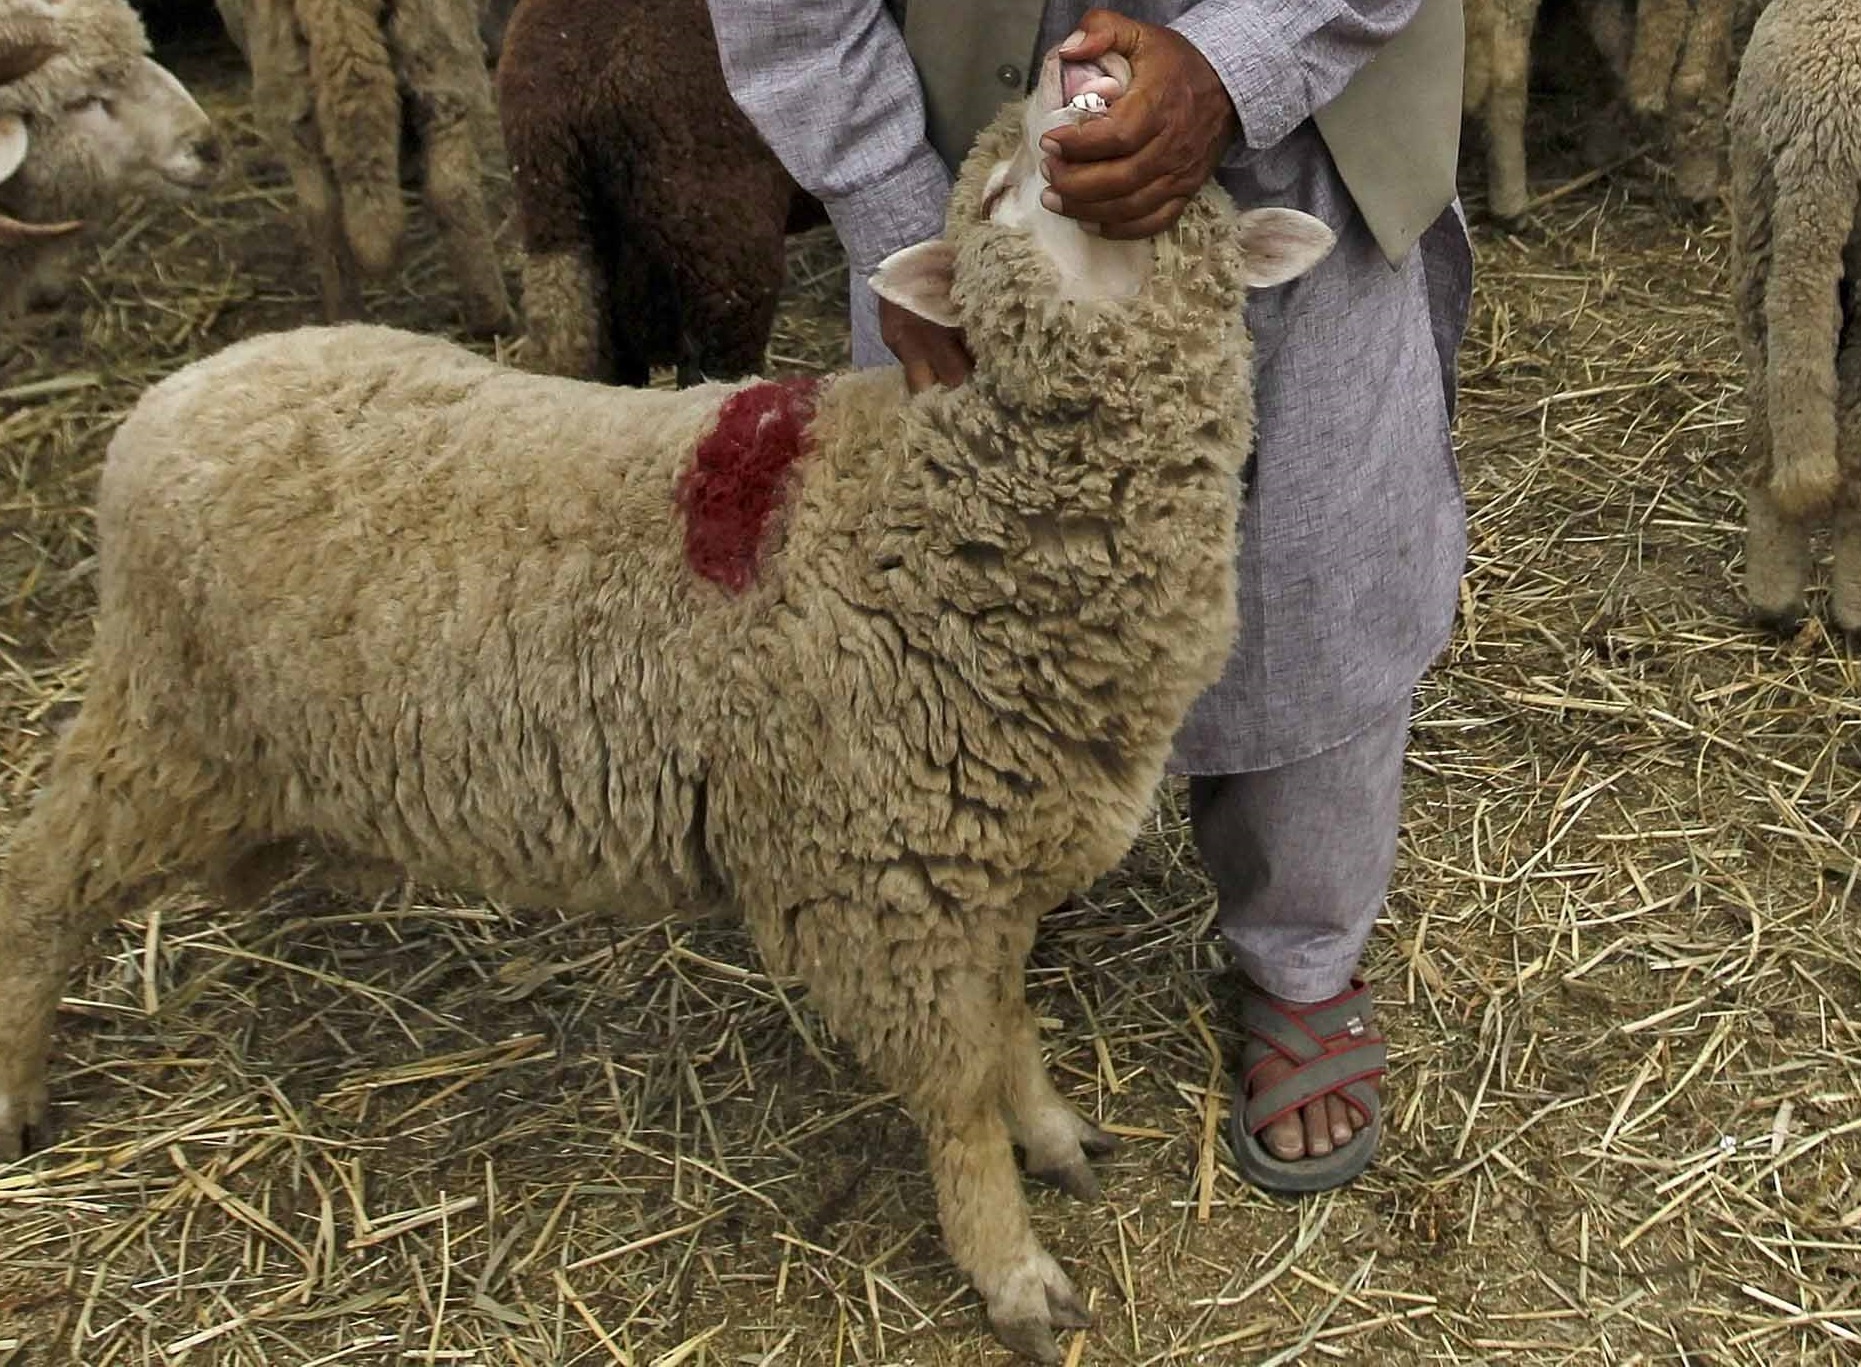 A Kashmiri Muslim man checks the teeth of a sheep to determine its age at a livestock market ahead of the Eid al-Adha festival in Srinagar September 21, 2015. Muslims across the world are preparing to celebrate the annual festival of Eid al-Adha or the Feast of the Sacrifice, which marks the end of the annual hajj pilgrimage, by slaughtering goats, sheep, cows and camels in commemoration of the Prophet Abraham's readiness to sacrifice his son to show obedience to Allah. Eid al-Adha in Kashmir falls on September 25. REUTERS/Danish Ismail